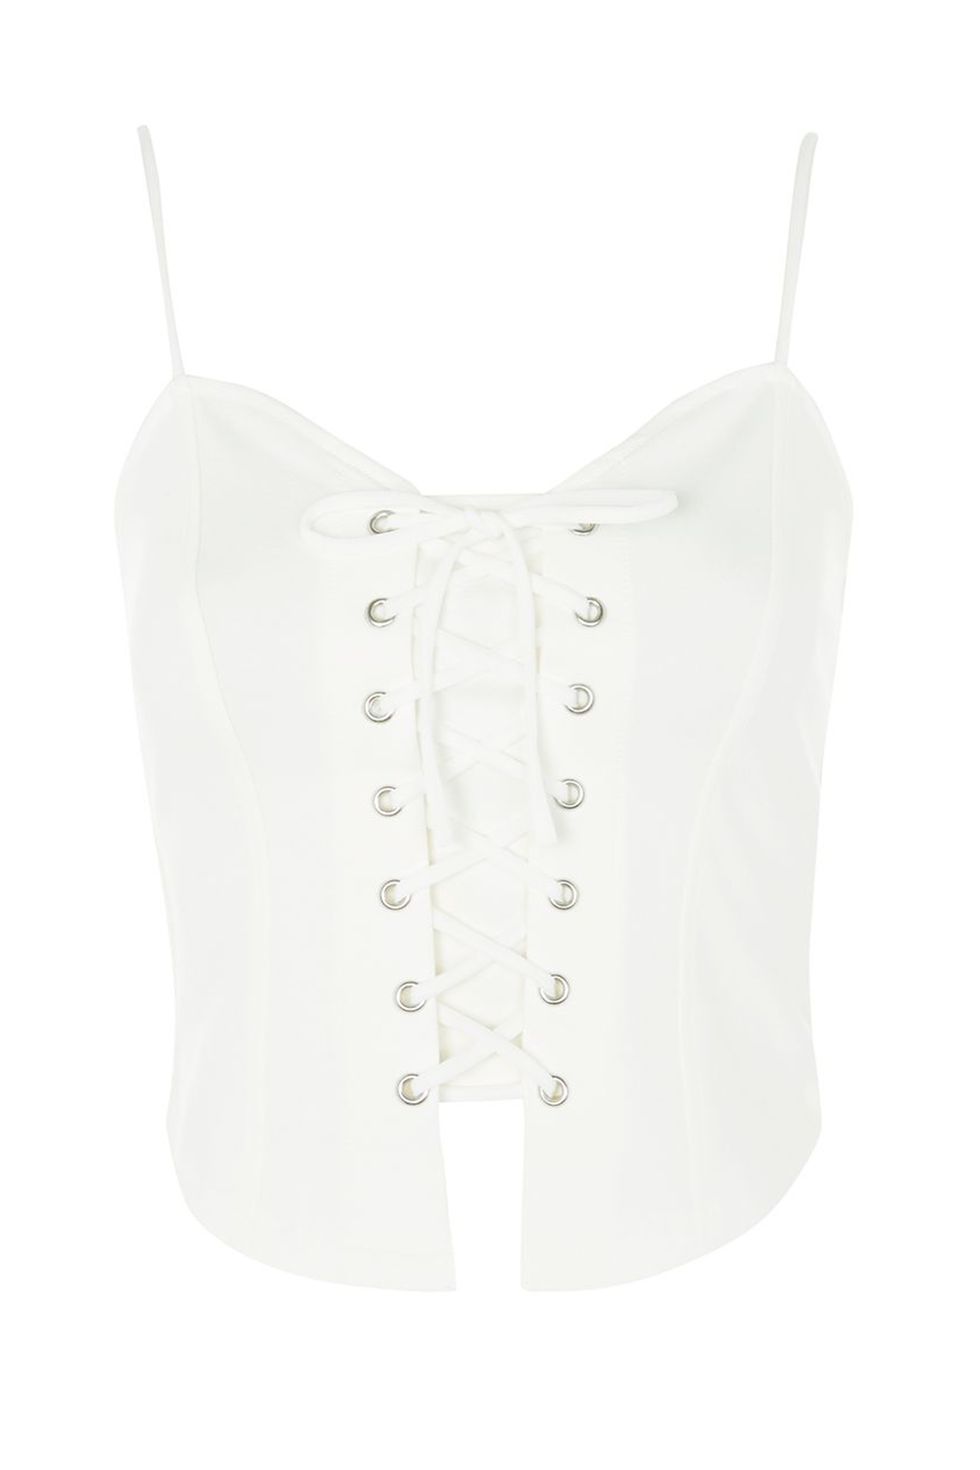 <p>
Topshop Corset Camisole Top, $40; <a href="http://us.topshop.com/en/tsus/product/clothing-70483/tops-70498/corset-camisole-top-6735136?bi=0&amp;ps=20" data-tracking-id="recirc-text-link" target="_blank">topshop.com</a></p><p><span class="redactor-invisible-space" data-verified="redactor" data-redactor-tag="span" data-redactor-class="redactor-invisible-space"></span></p>